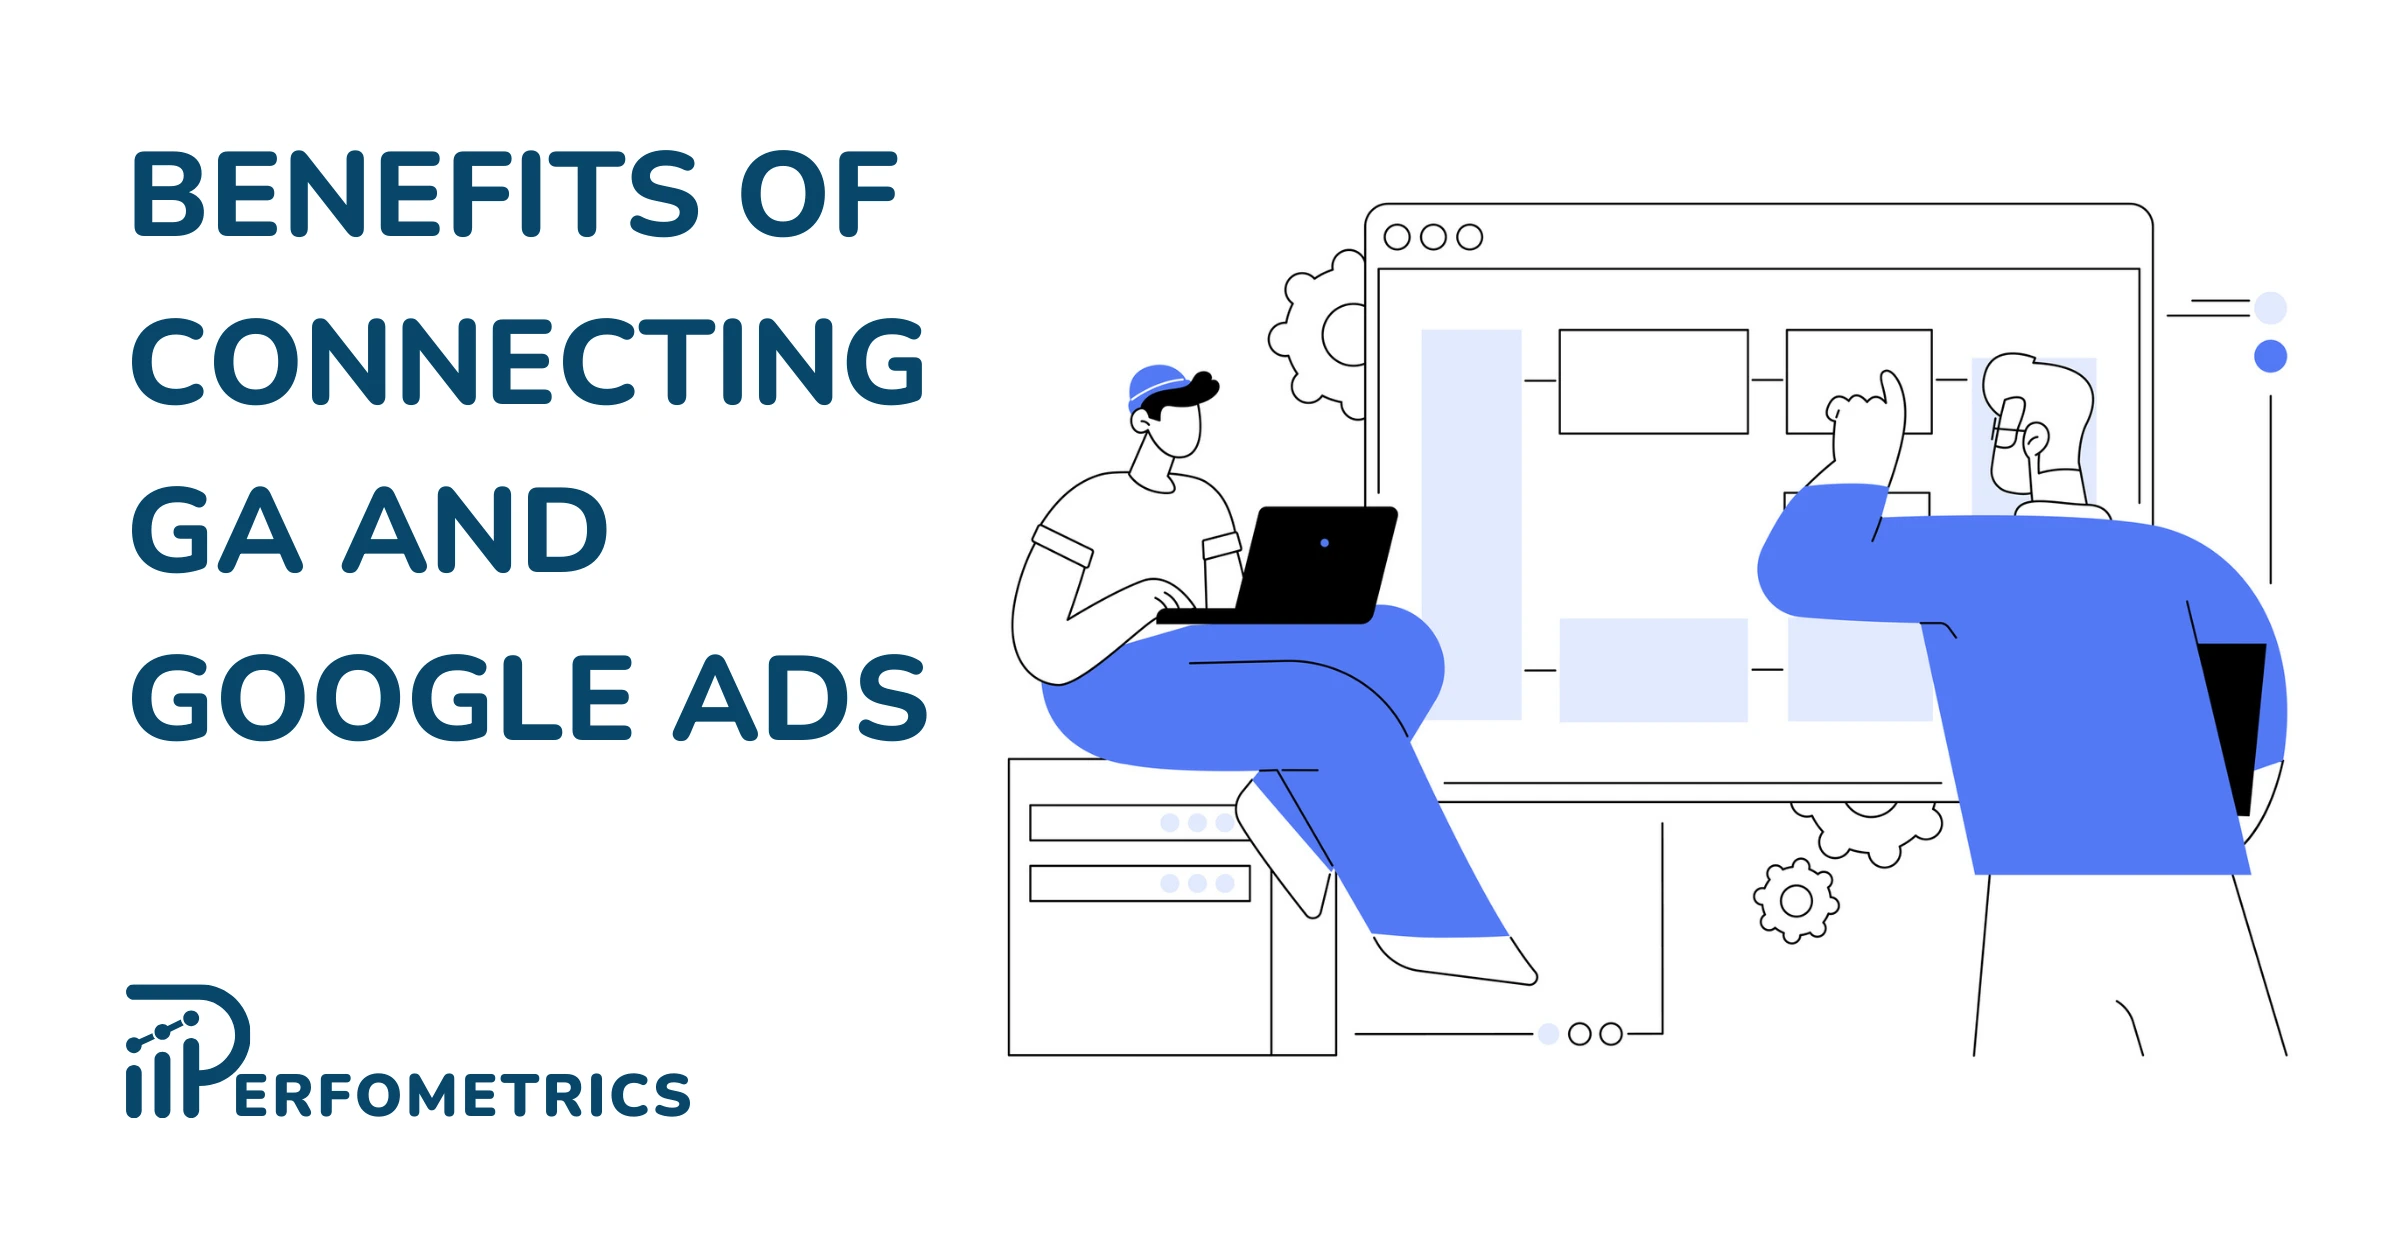 Benefits of Connecting Google Analytics and Google Ads